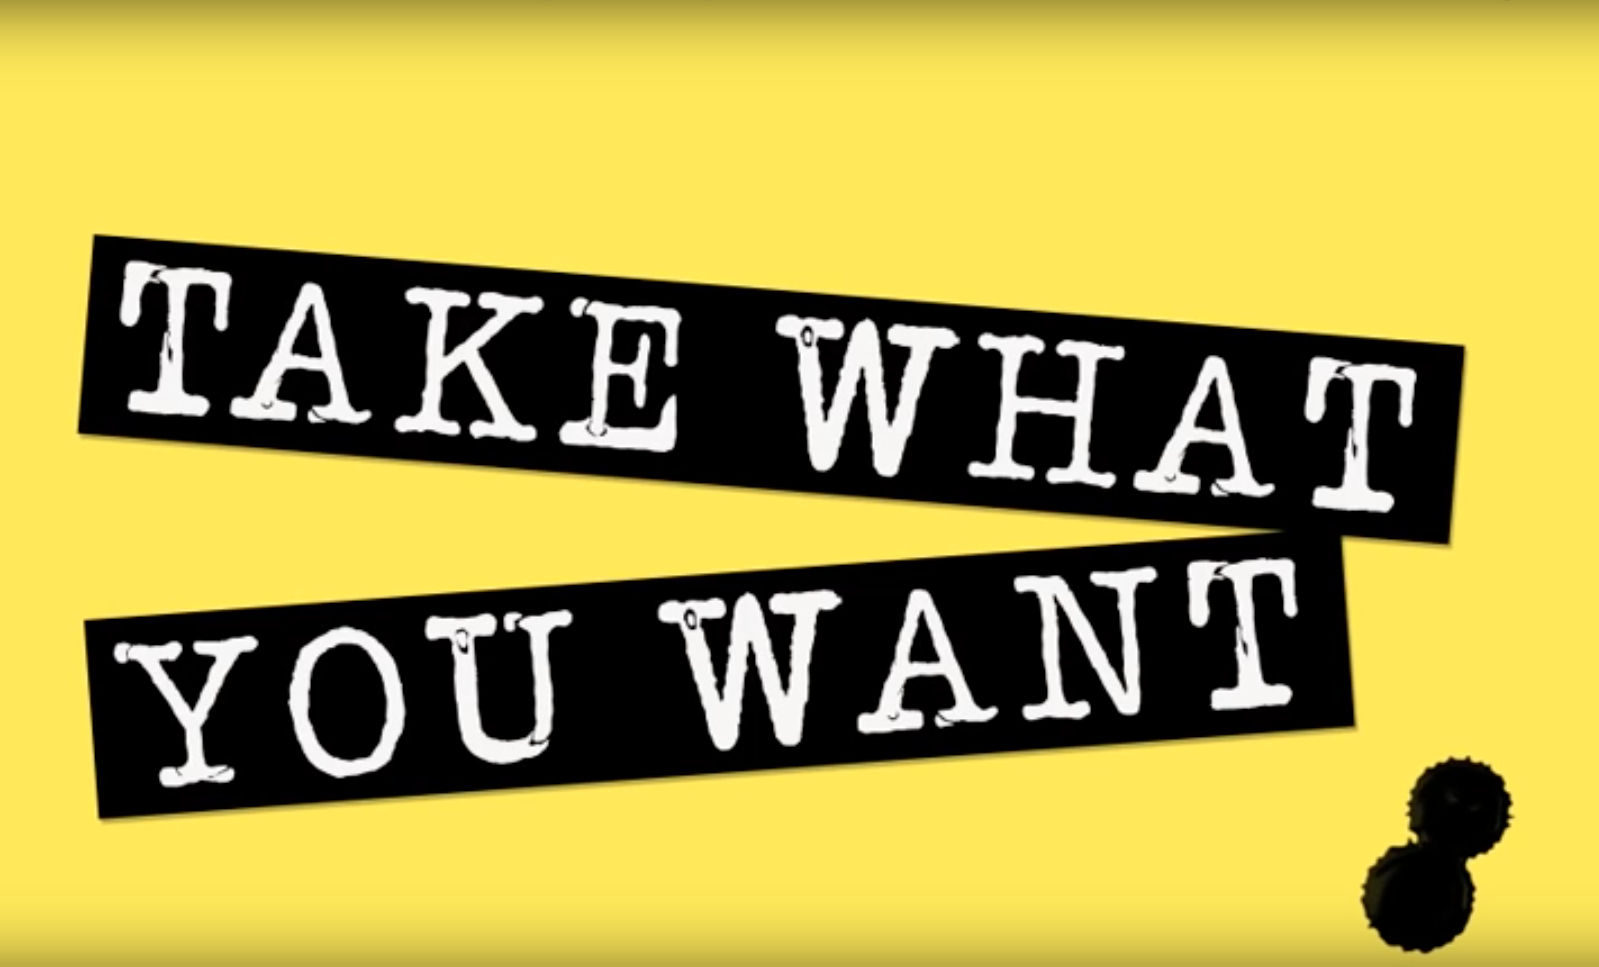 One ok Rock take what you want. Take what you want. Take what you want текст. Песня taking what s not yours